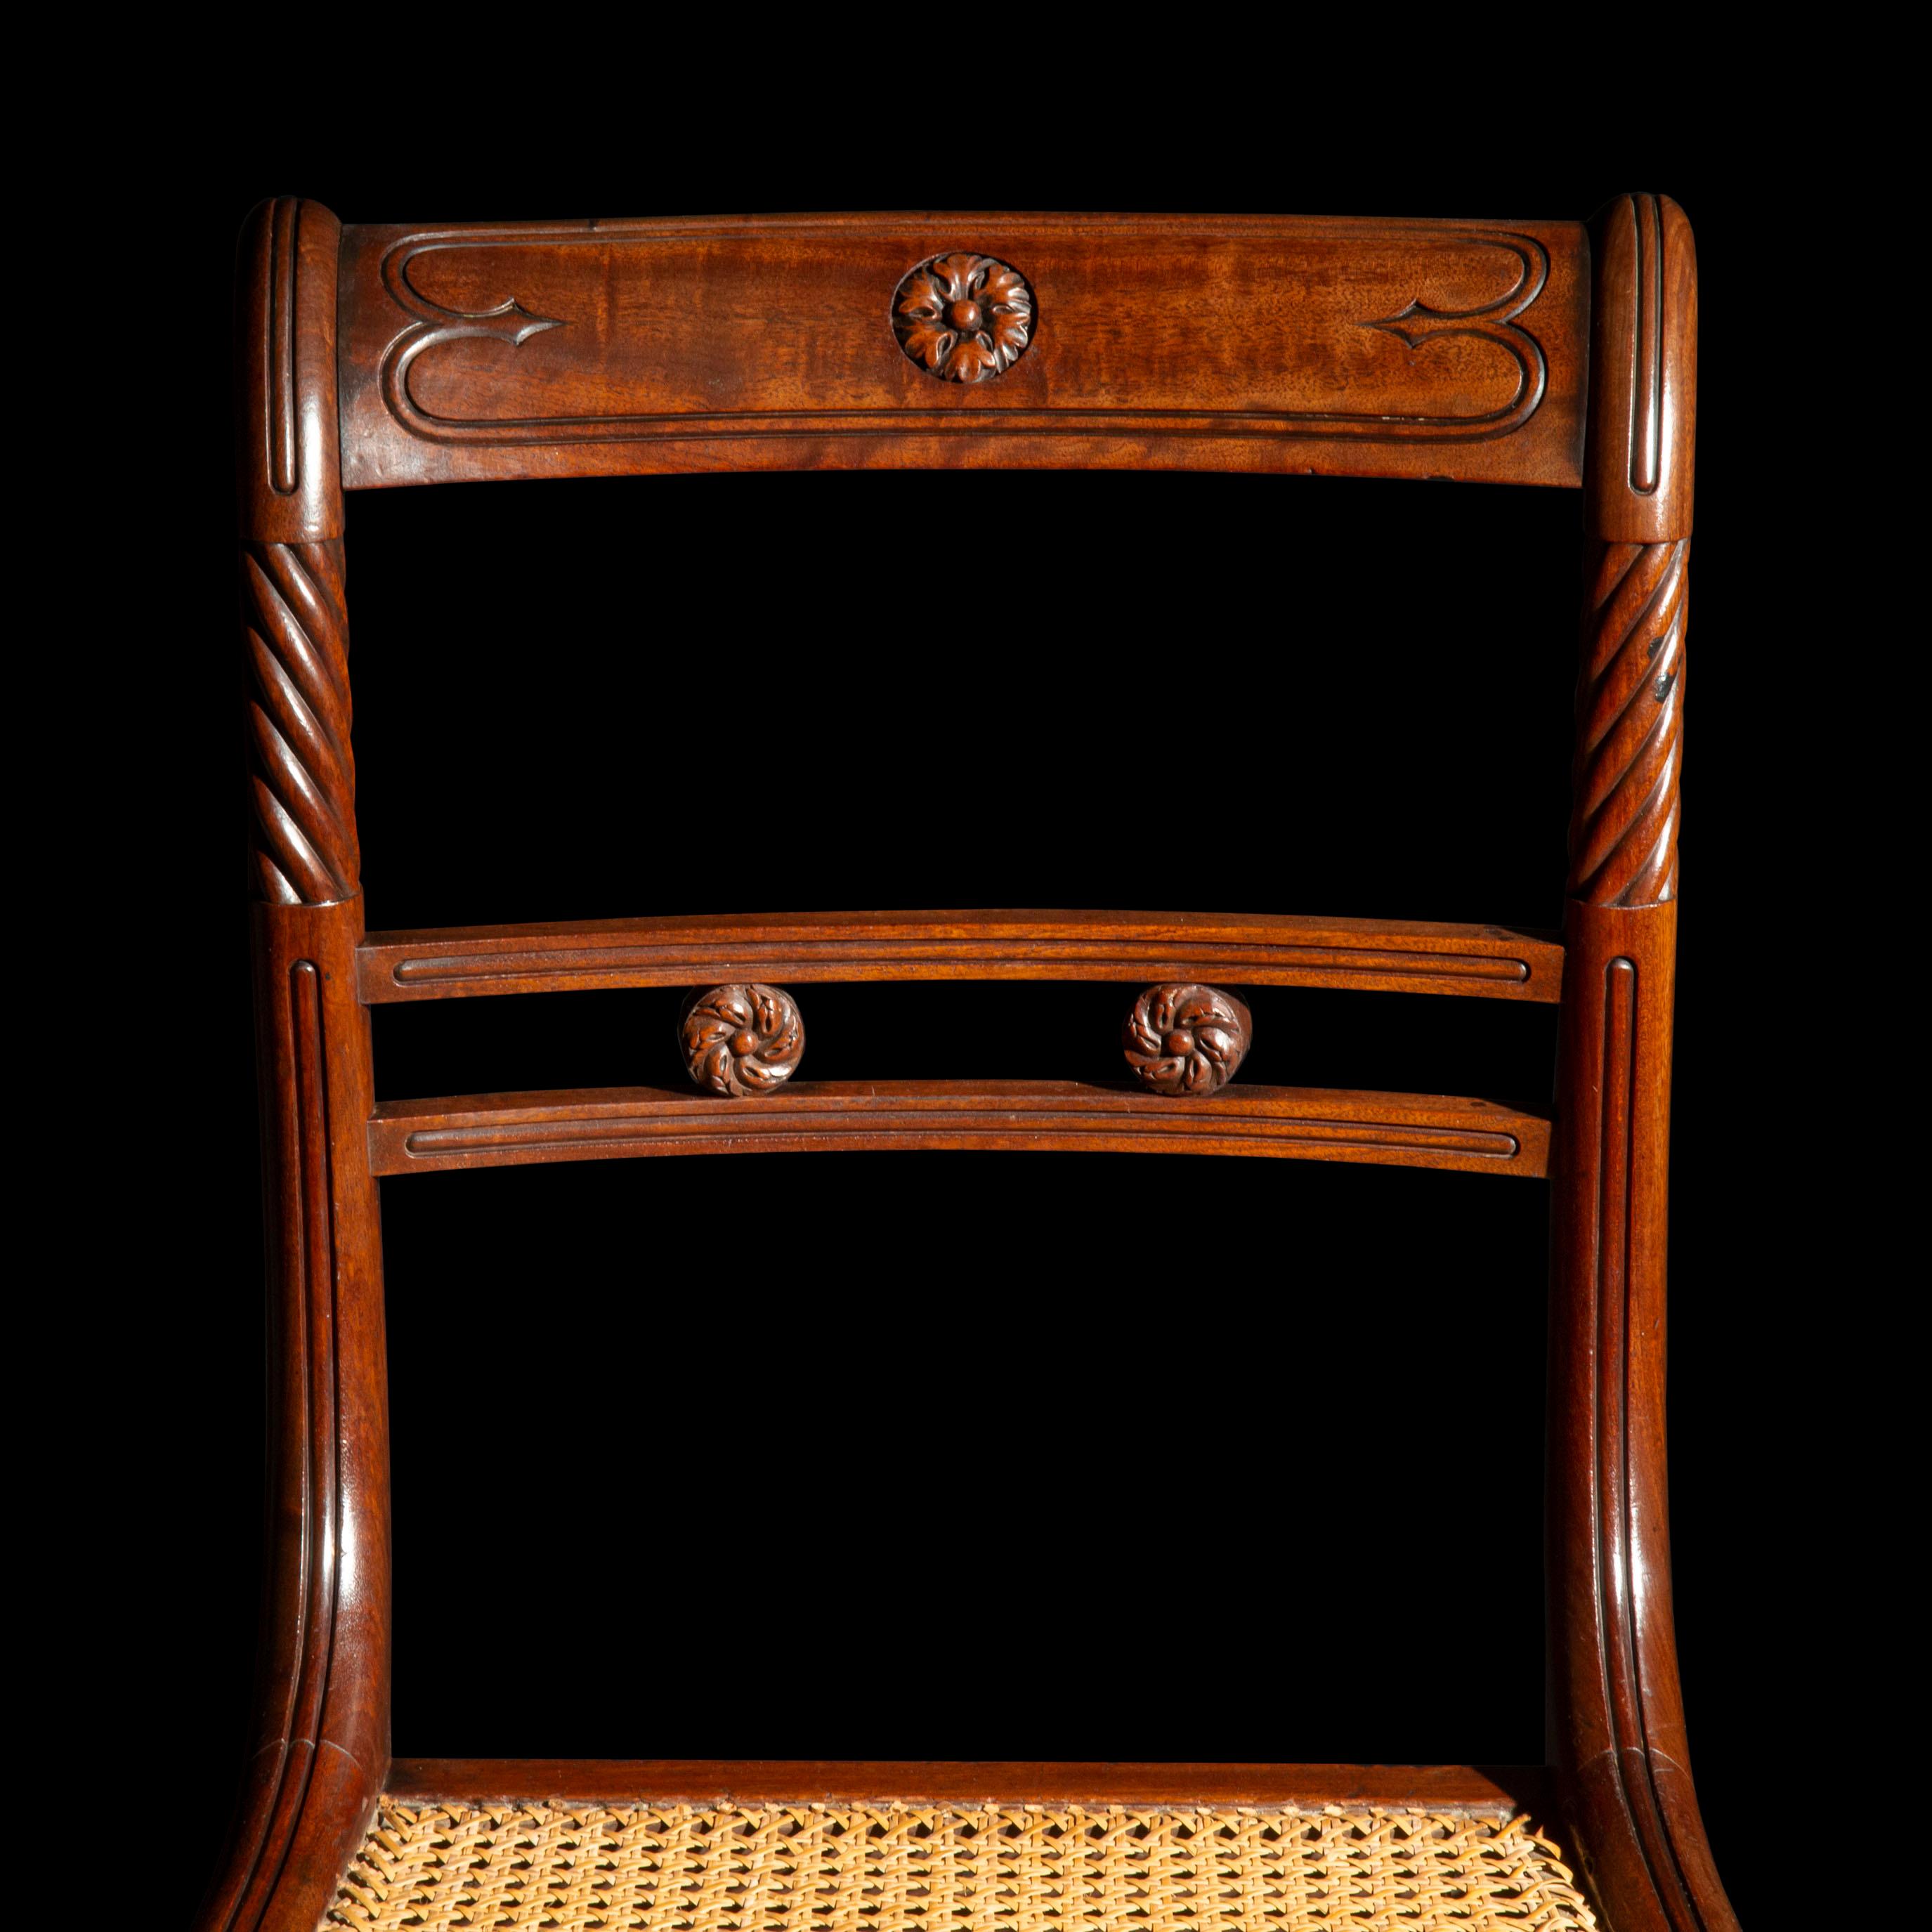 19th Century Set of Twelve Regency Klismos Chairs, Attributed to Gillows